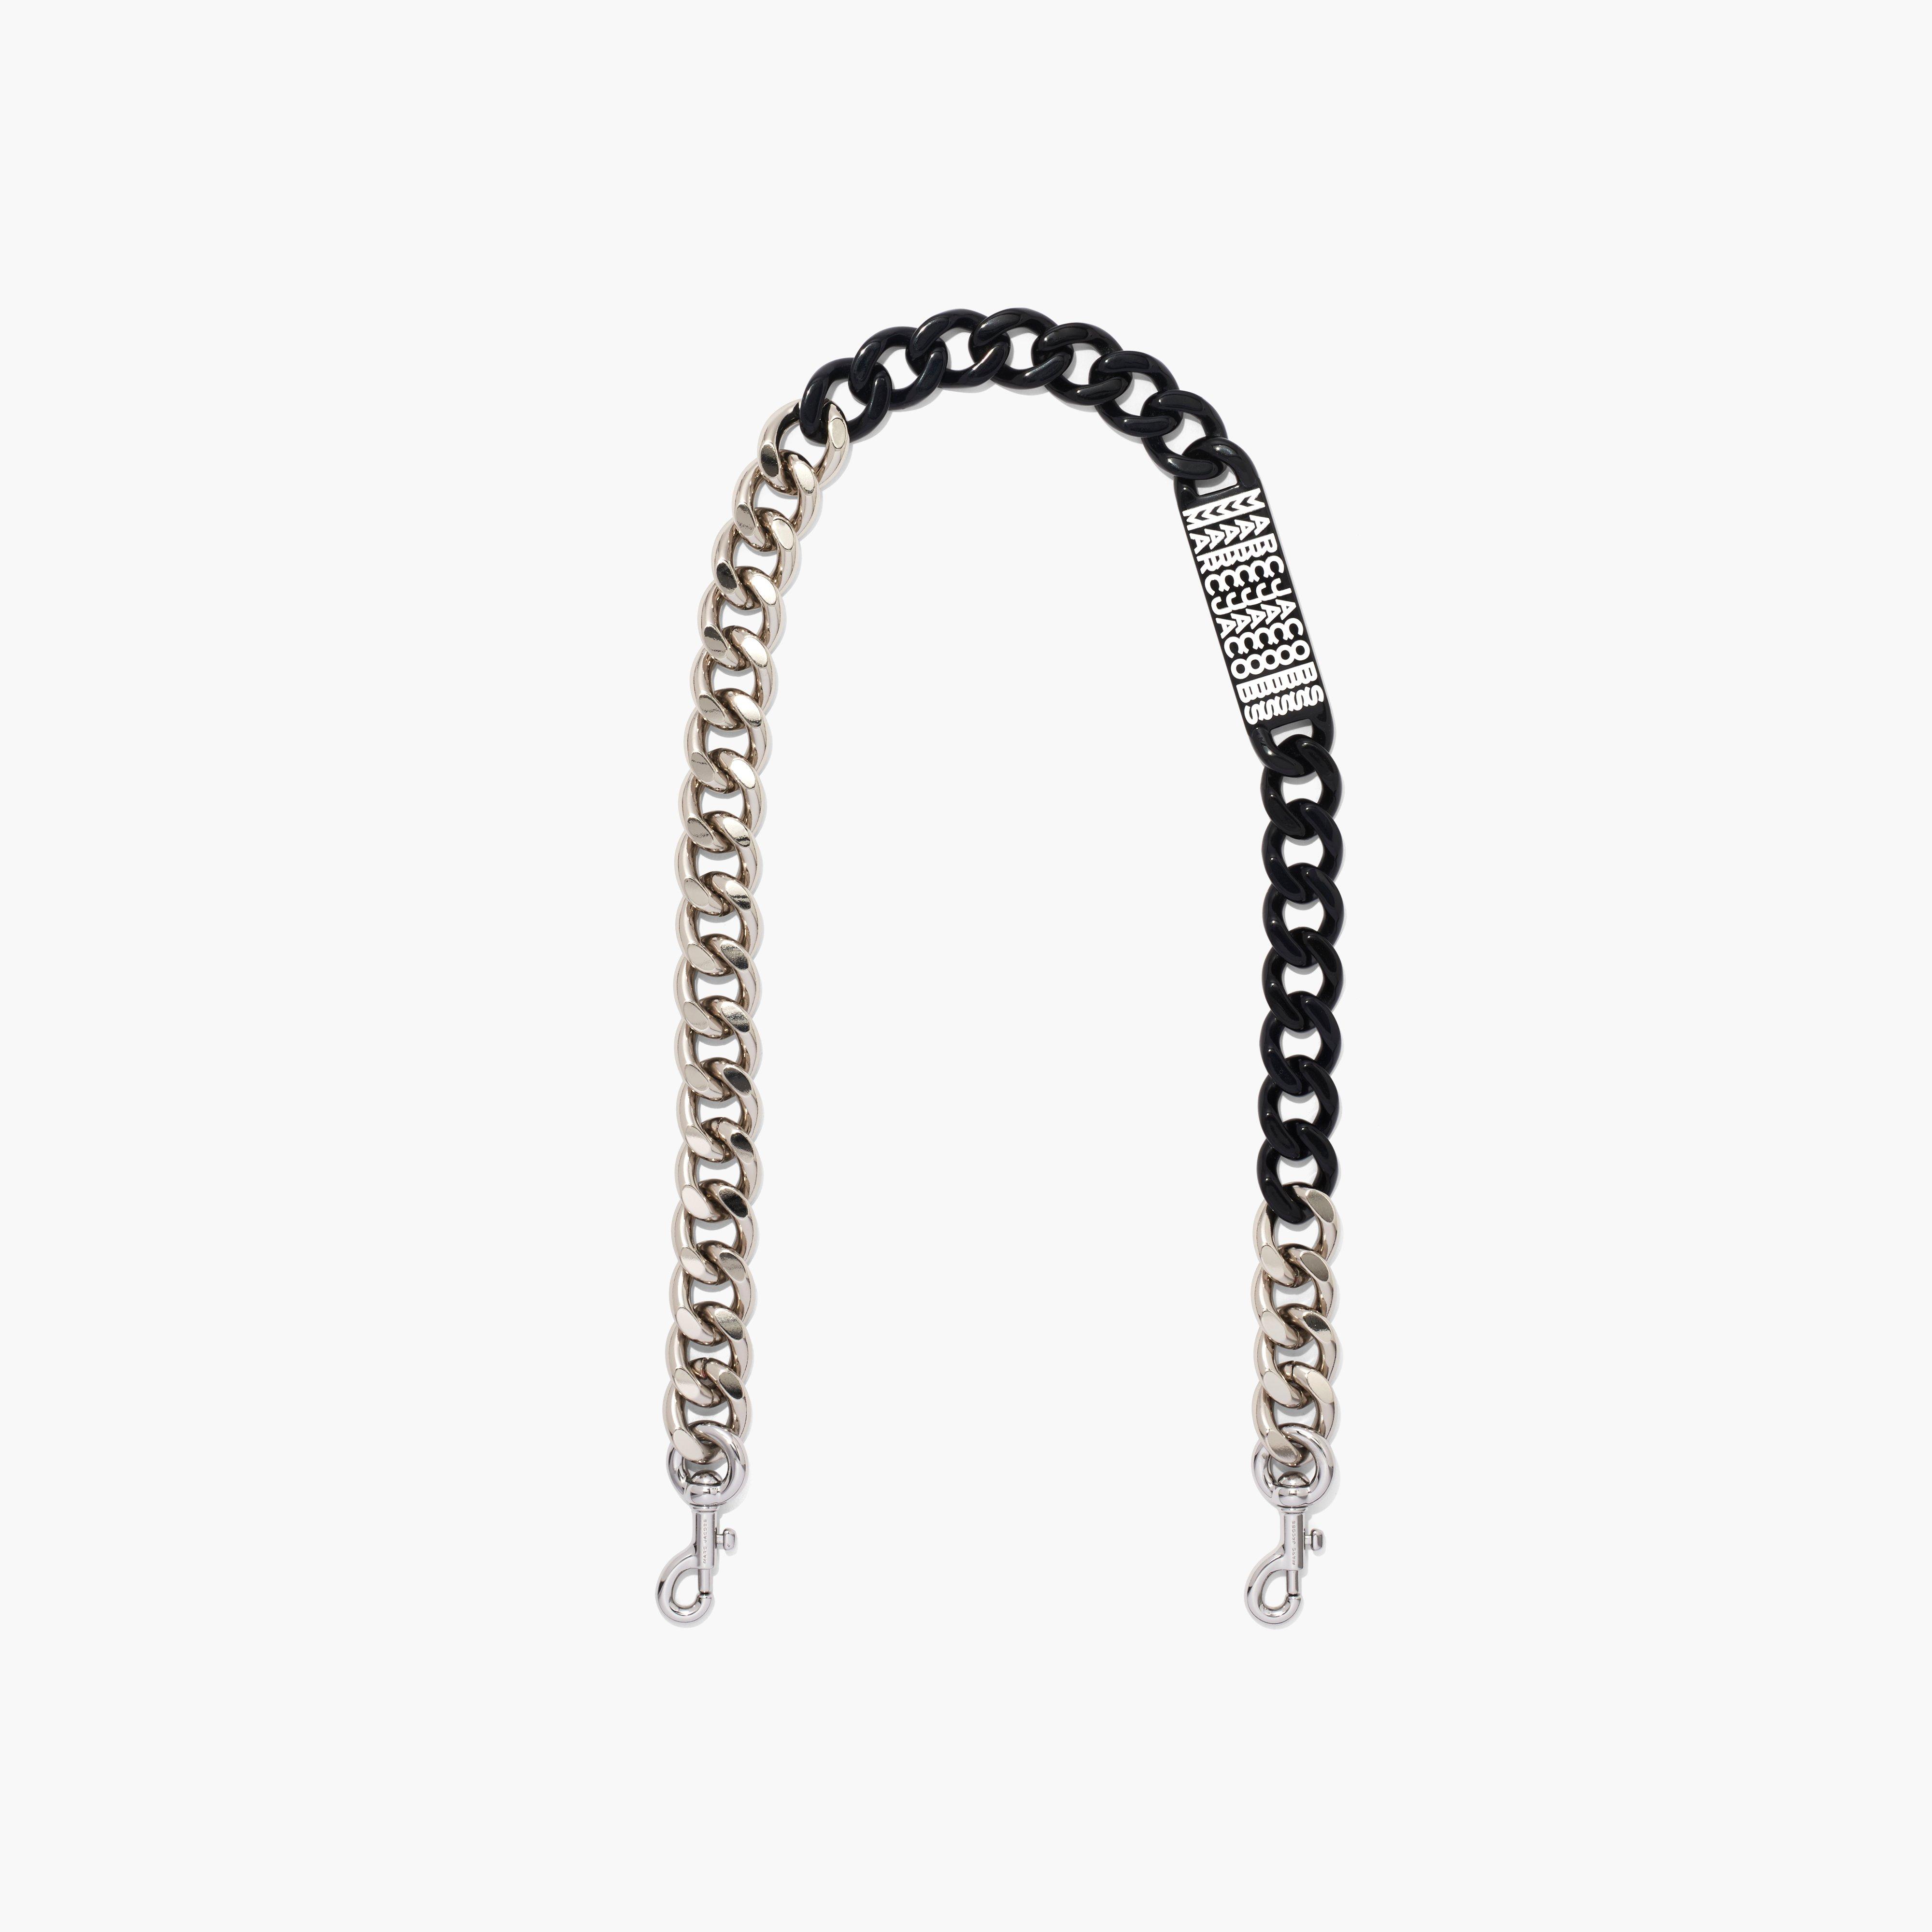 Marc by Marc jacobs The Barcode Chain Shoulder Strap,NICKEL/BLACK